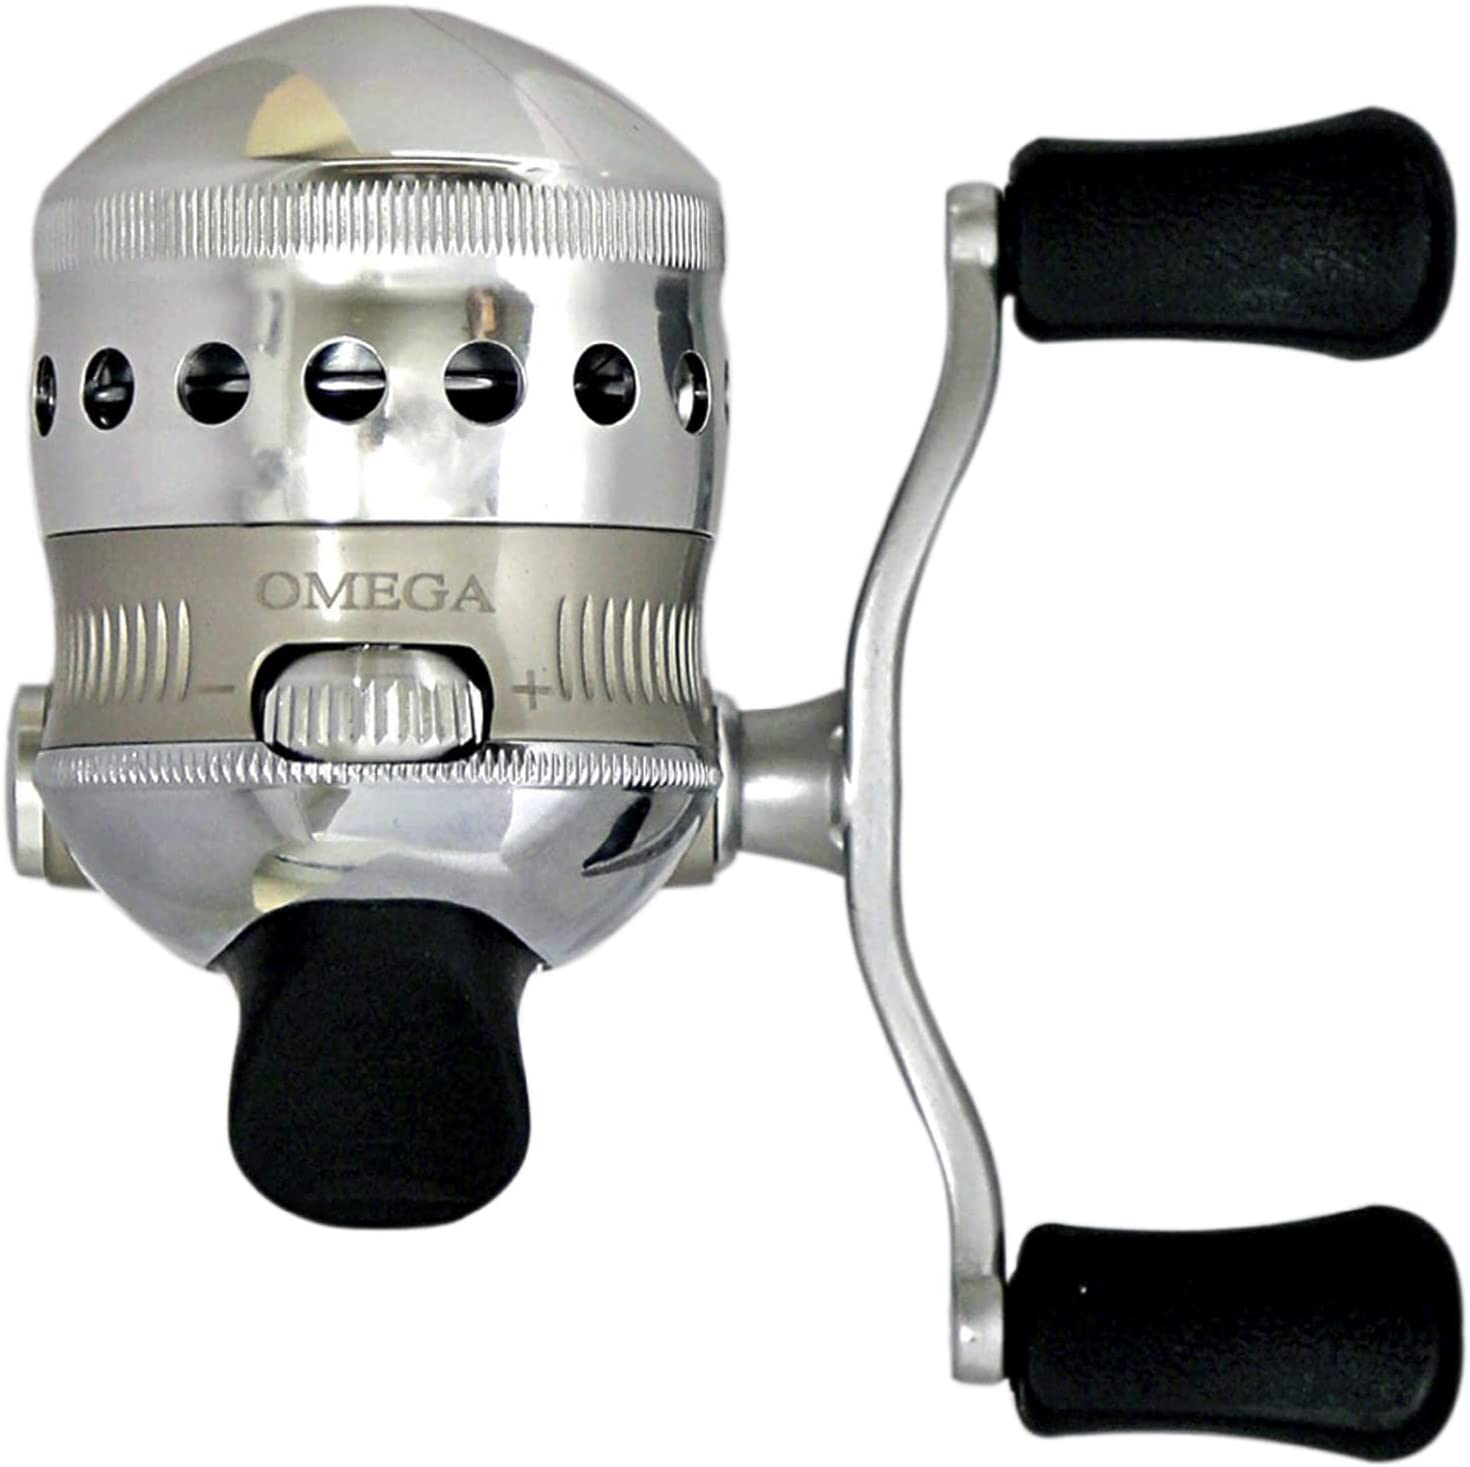 Zebco Omega Spincast Fishing Reel Review